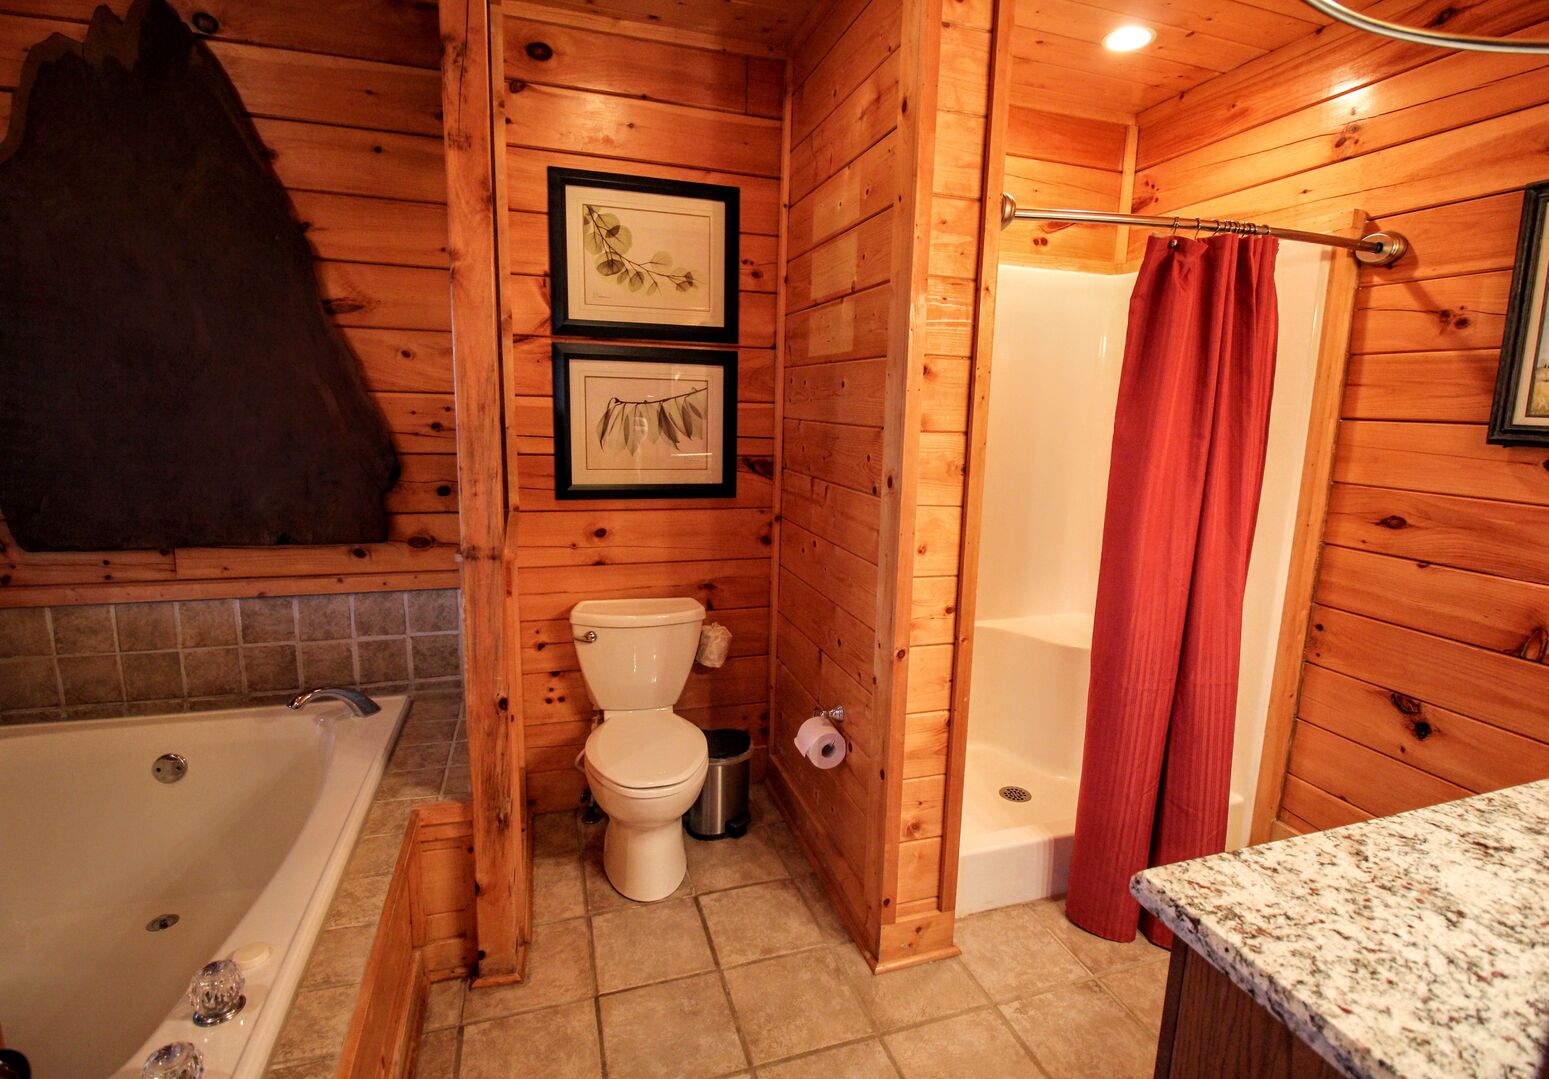 UPSTAIRS FULL BATH INCLUDING 2 PERSON JACUZZI, BLOW DRYER PROVIDED